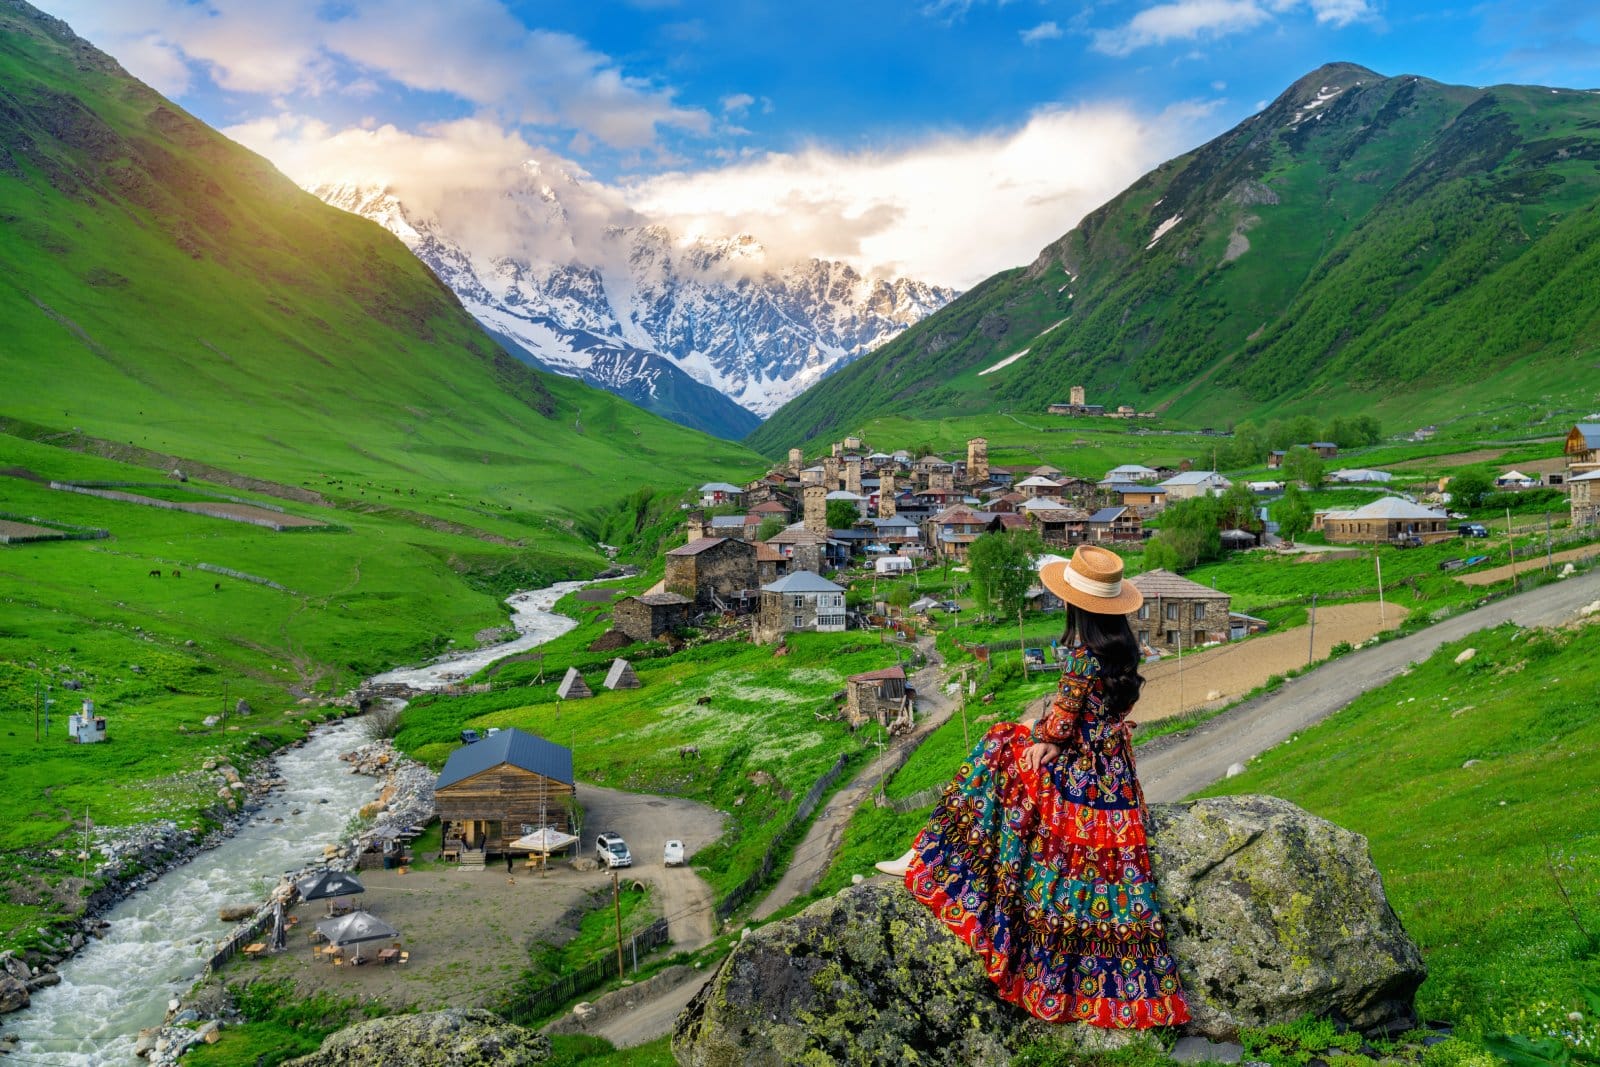 Image Credit: Shutterstock / Guitar photographer <p>Not the state, but the country nestled at the intersection of Europe and Asia. It’s a hidden gem with low living costs, welcoming locals, and a visa-free policy for up to a year. Talk about Southern hospitality!</p>